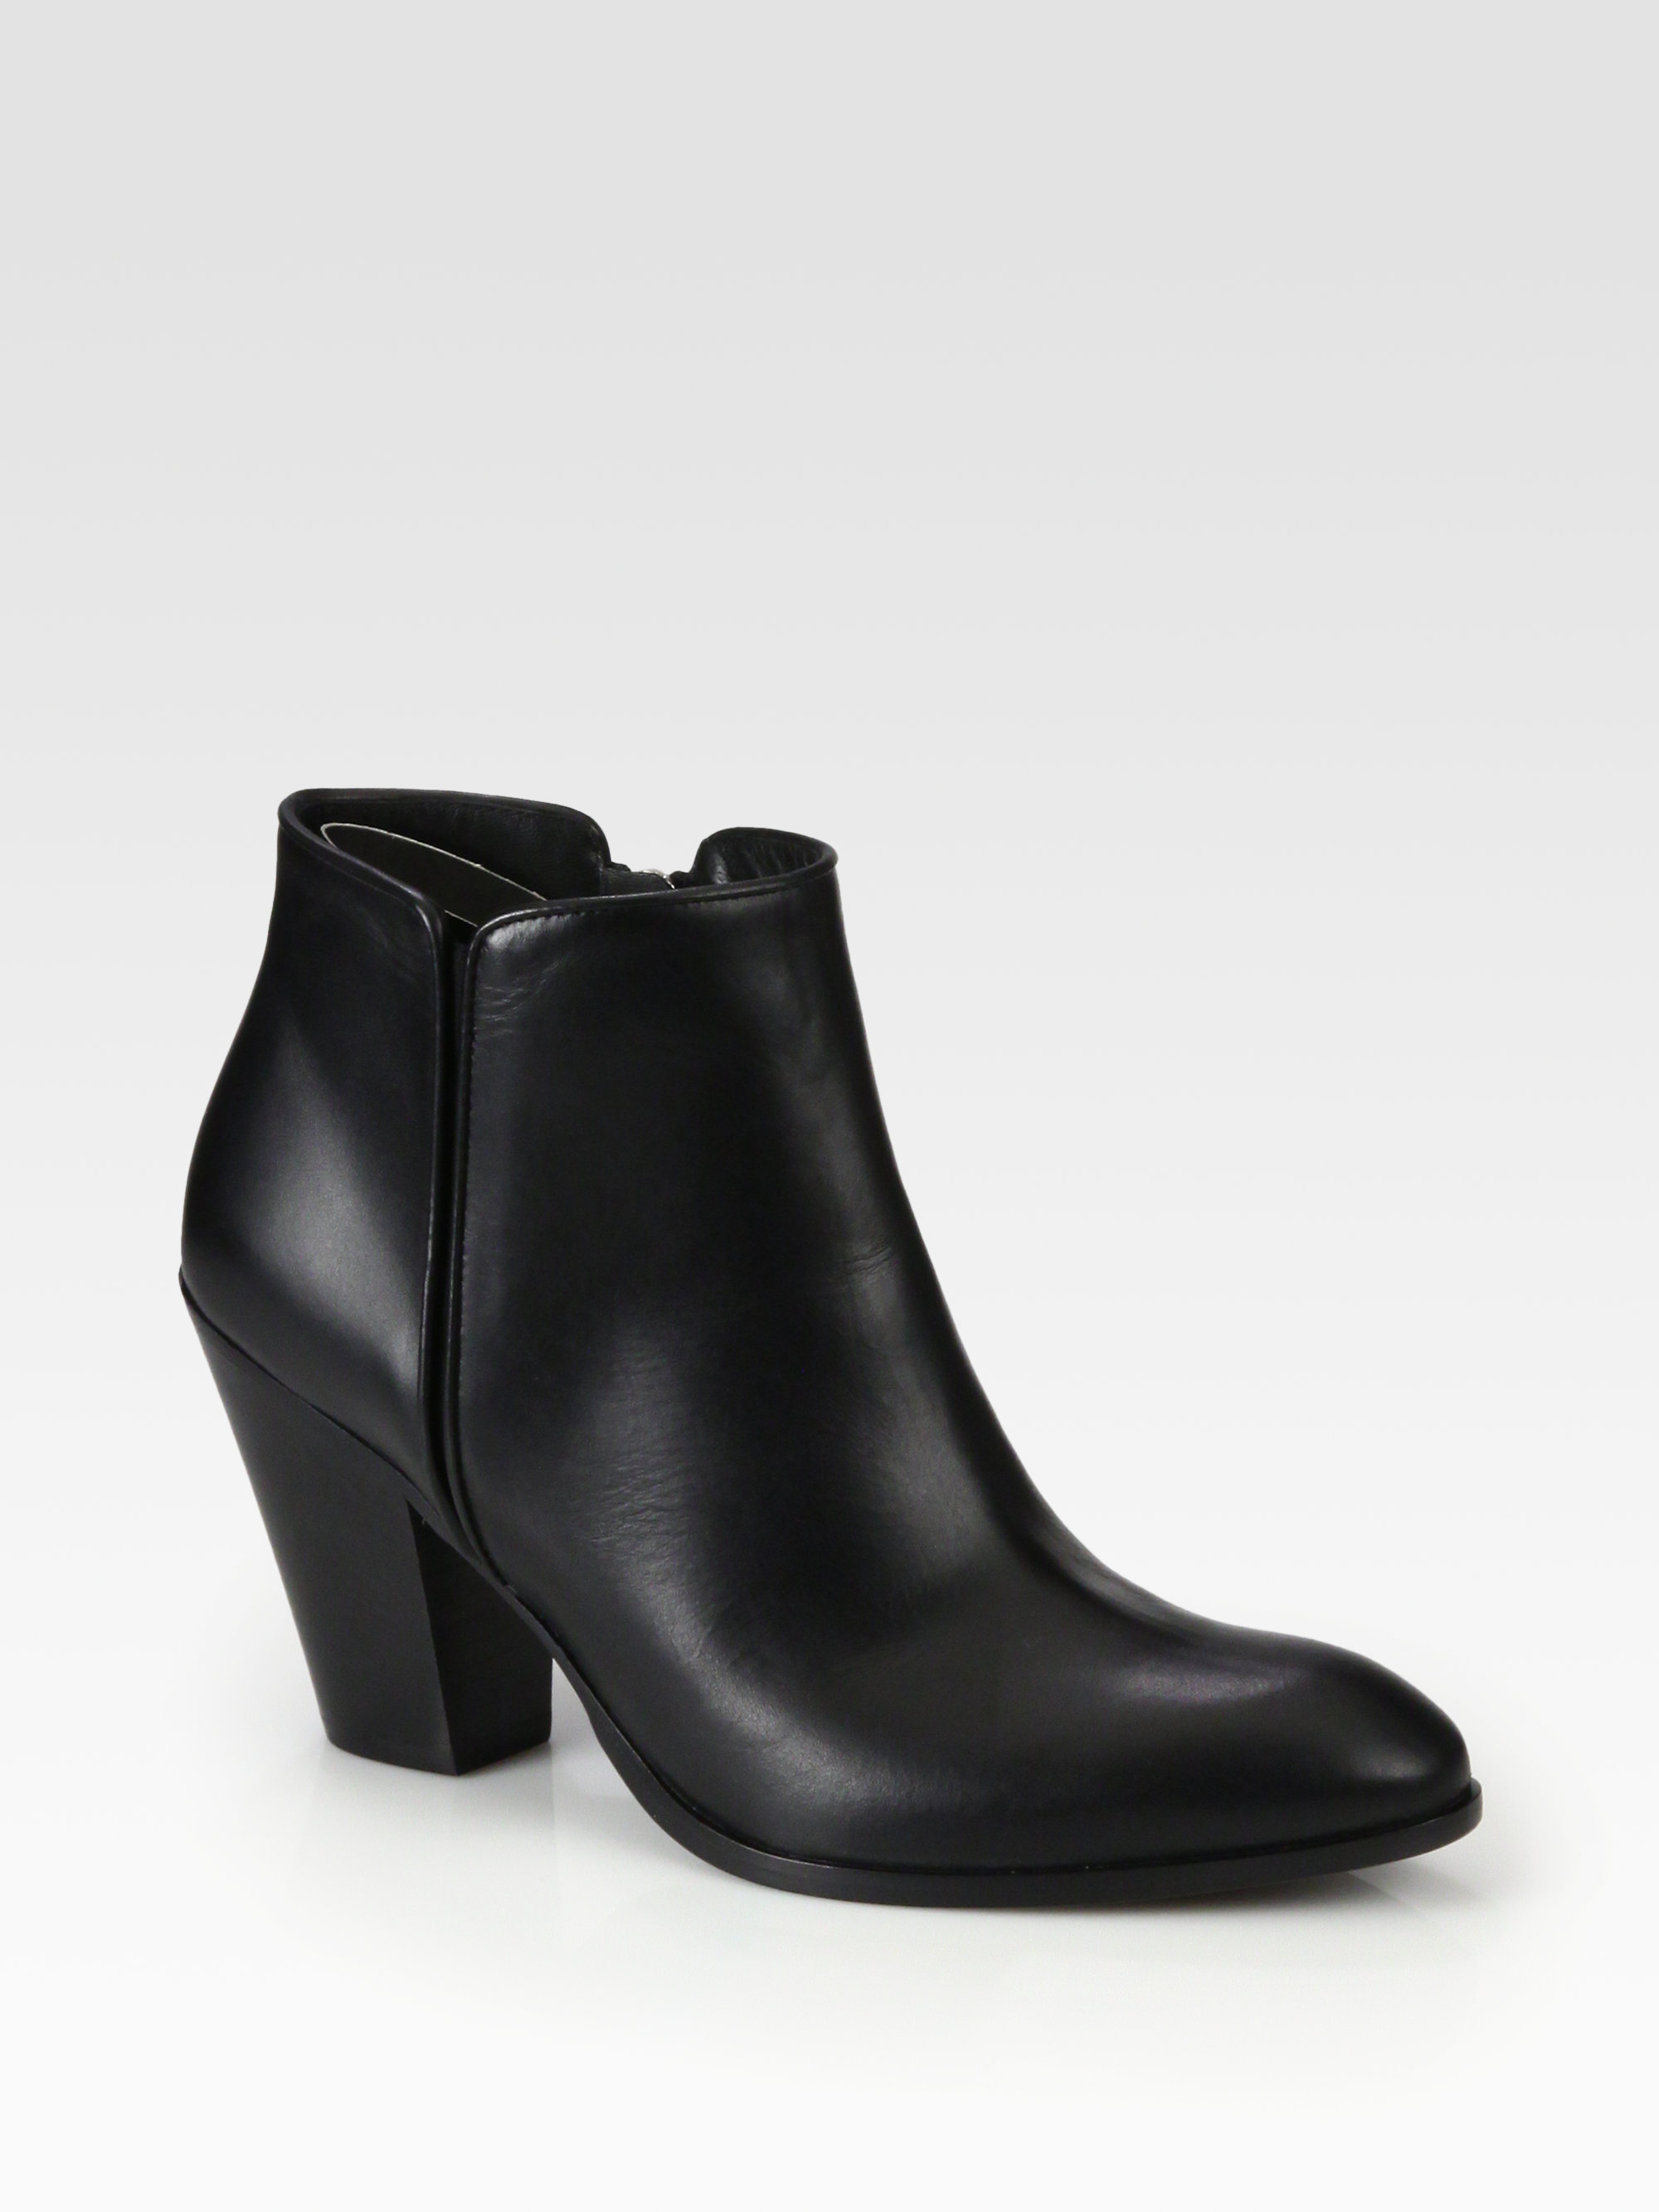 Giuseppe Zanotti Leather Ankle Boots in Black | Lyst